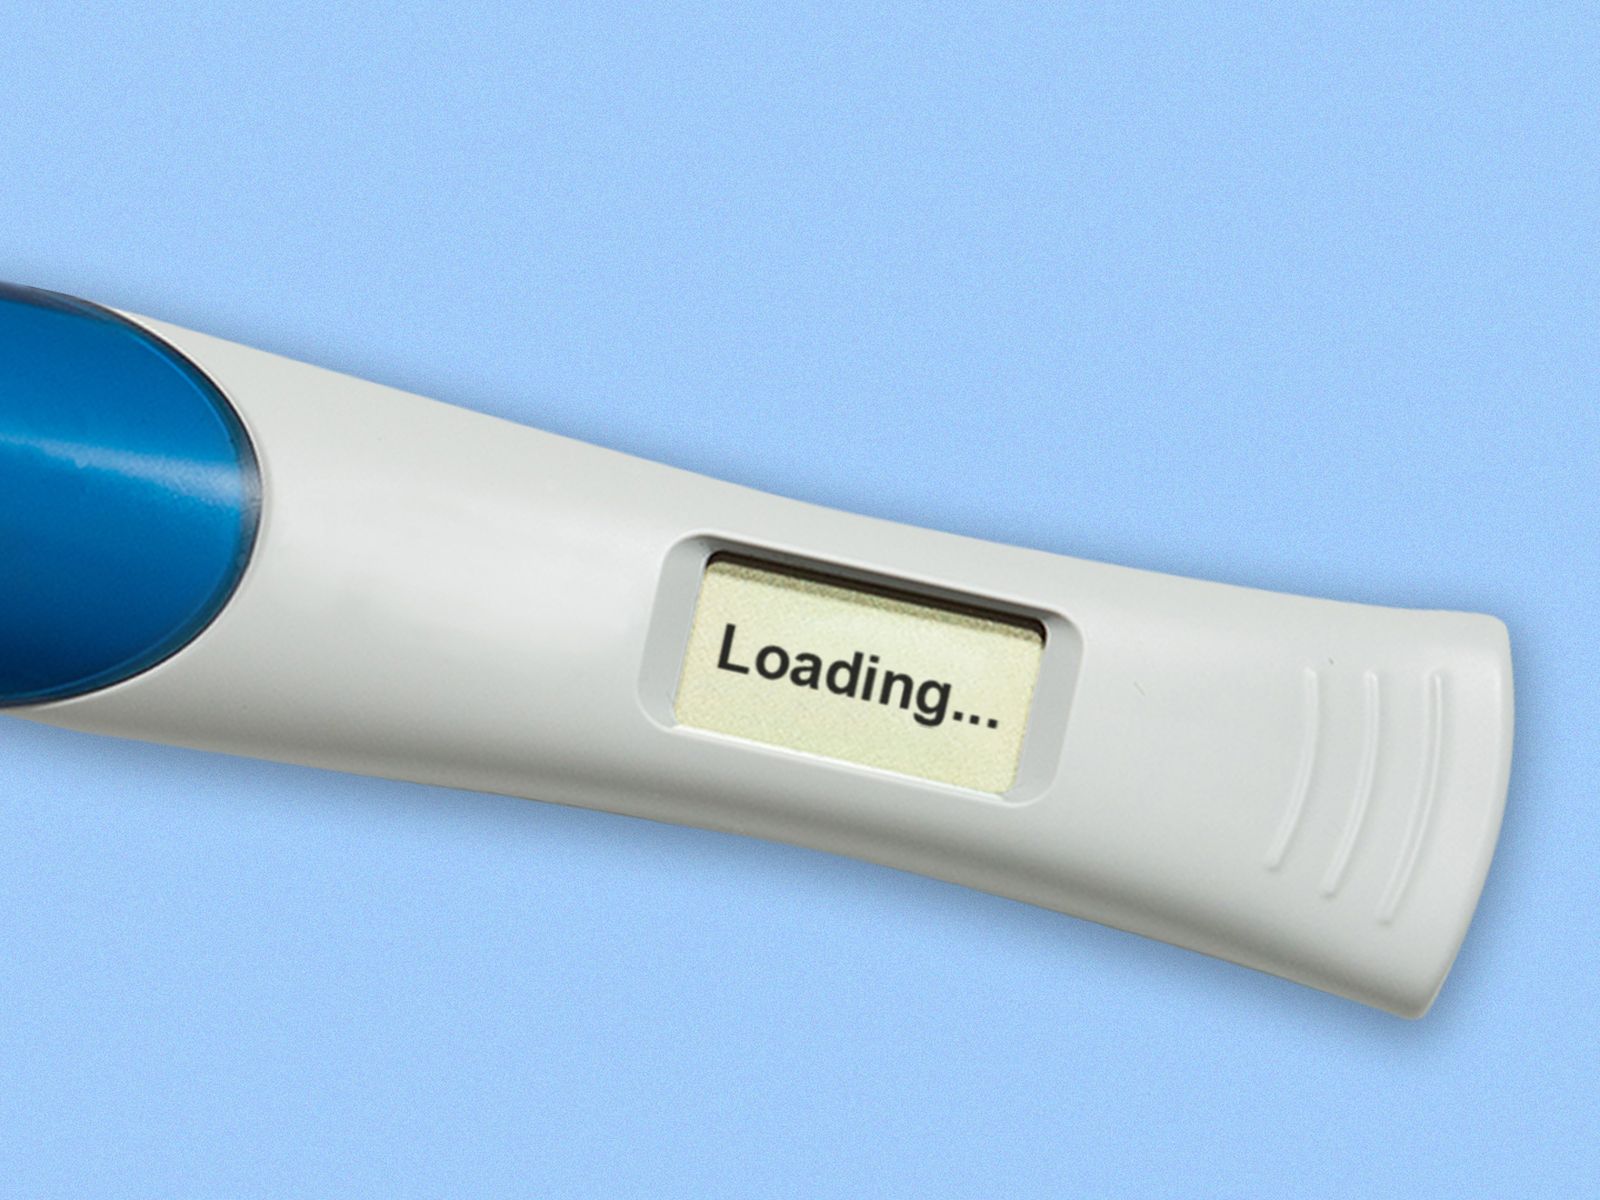  Proov Check Early Pregnancy Test, at Home Pregnancy Detection  for Women with 99% Accurate Results, 10 HCG Test Strips